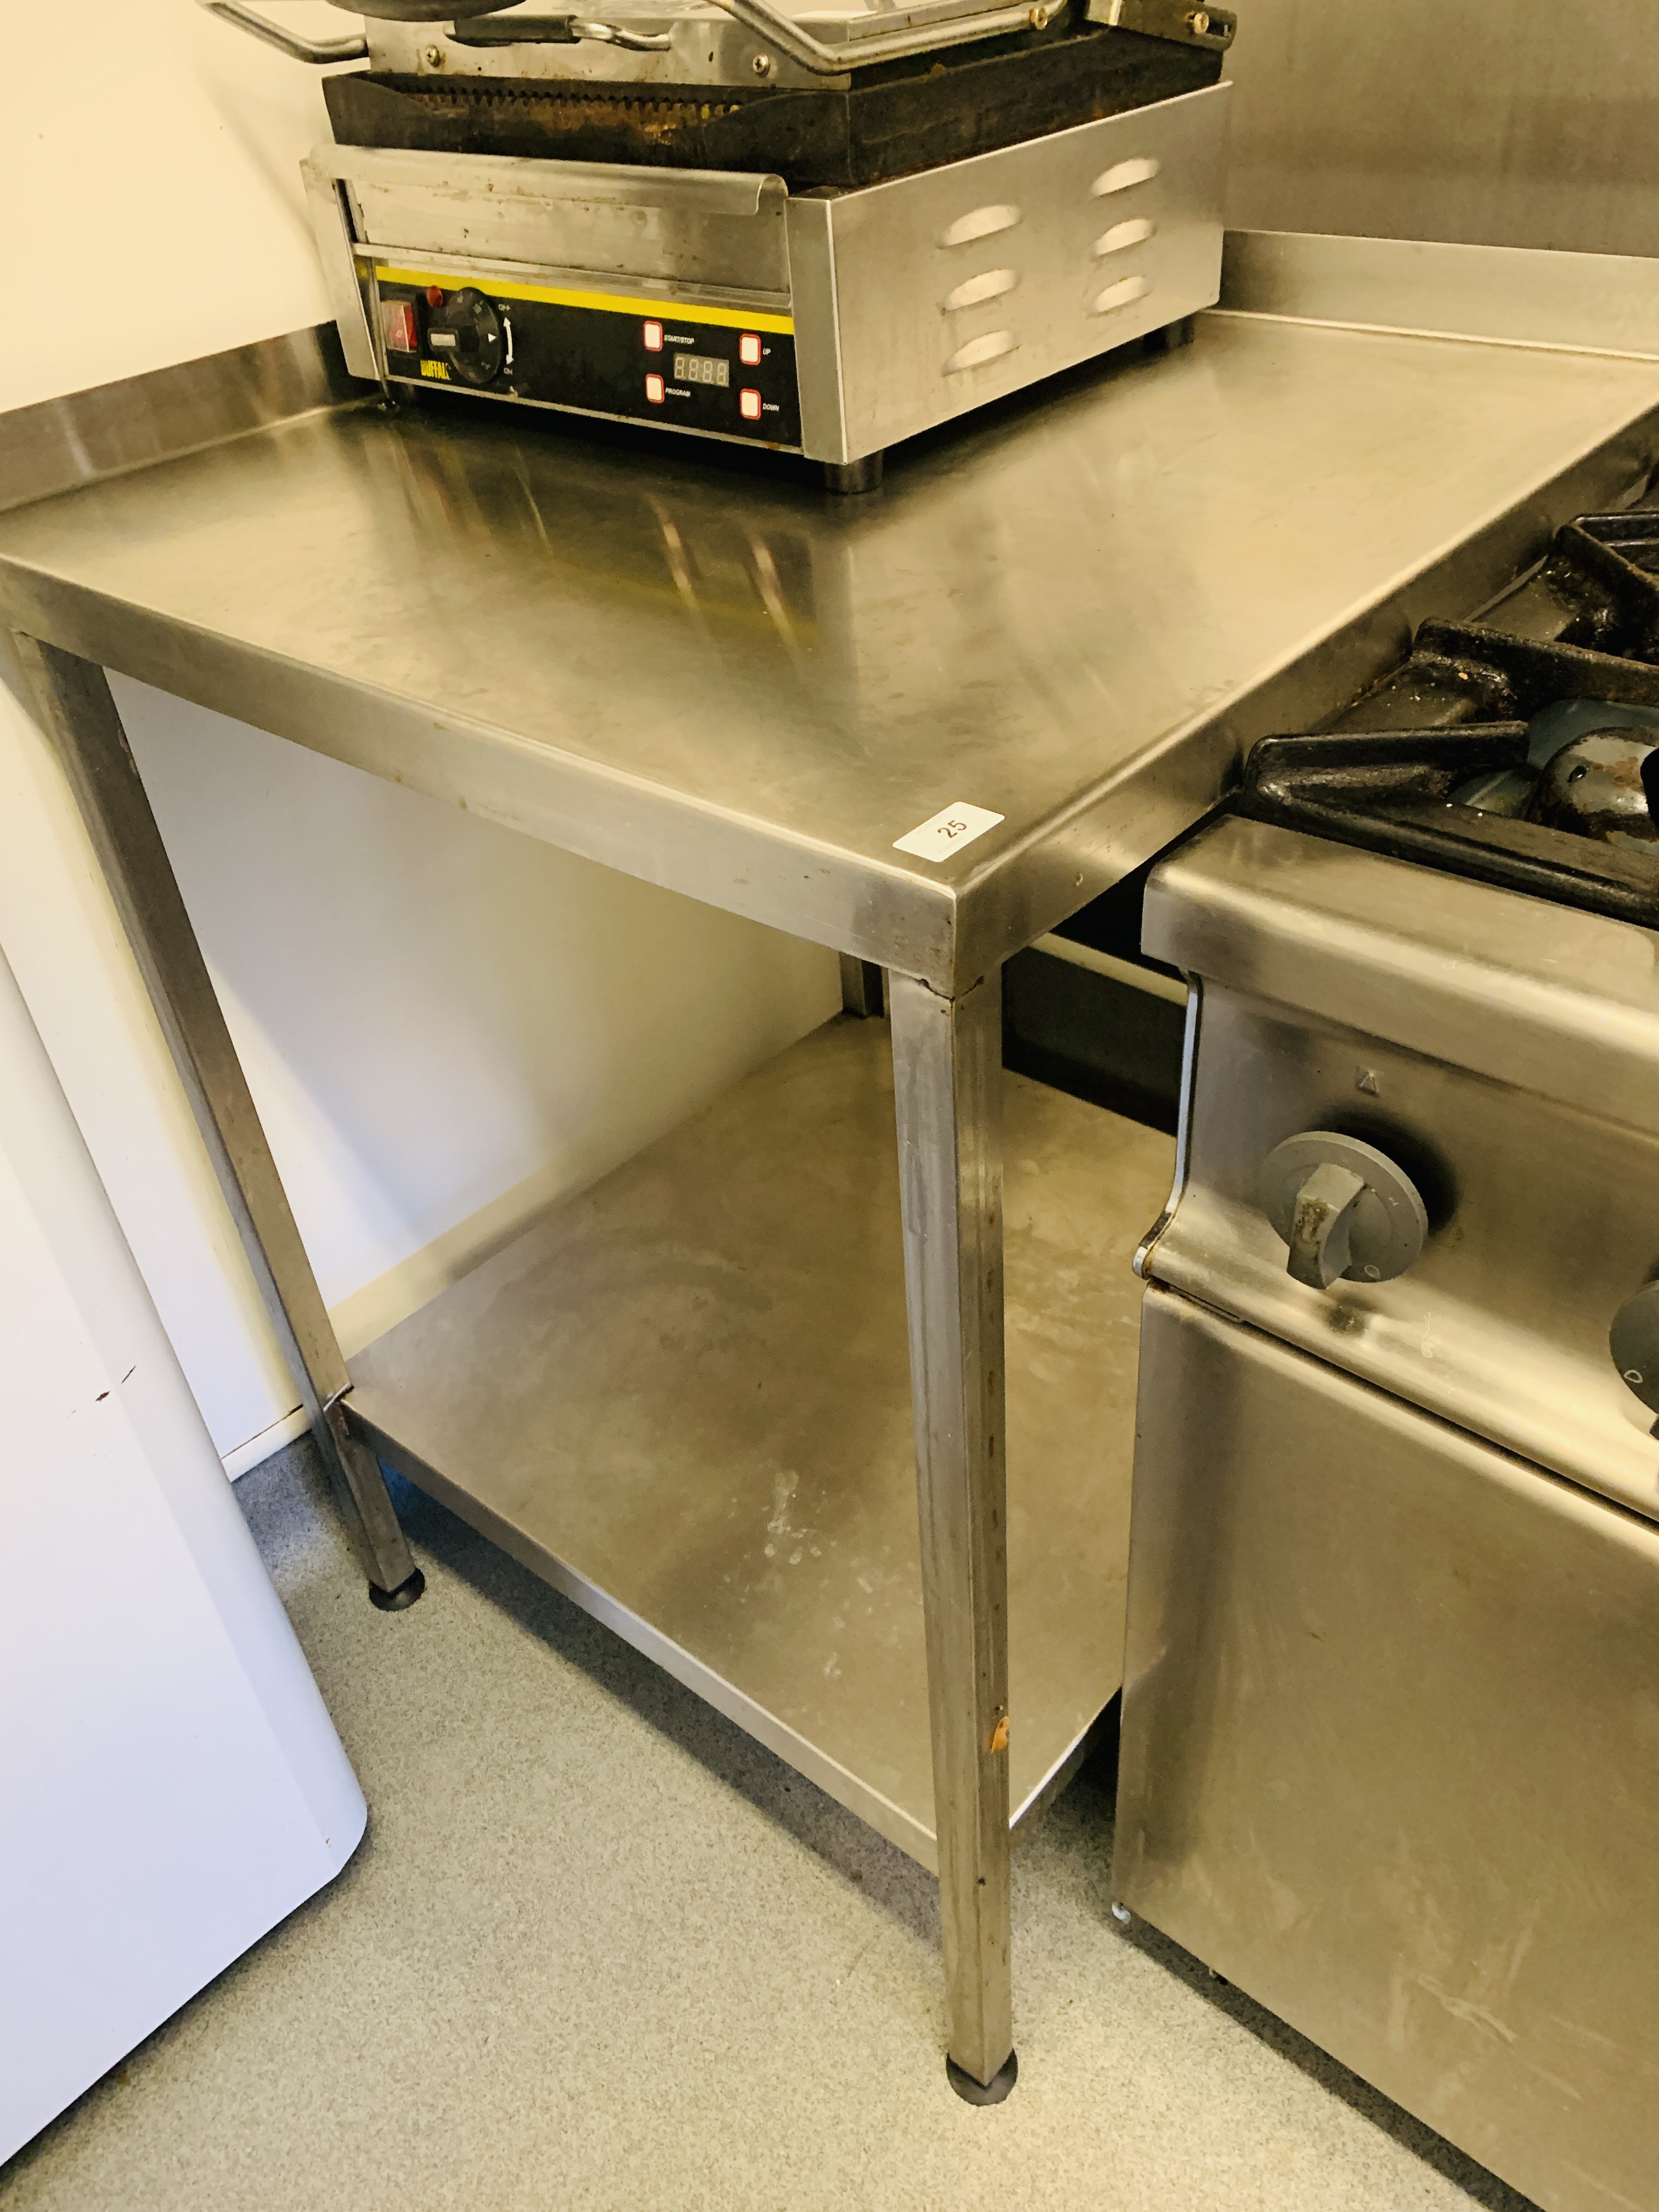 2 X STAINLESS STEEL TWO TIER CORNER CATERING PREPARATION TABLE - W 70CM. D 70CM.